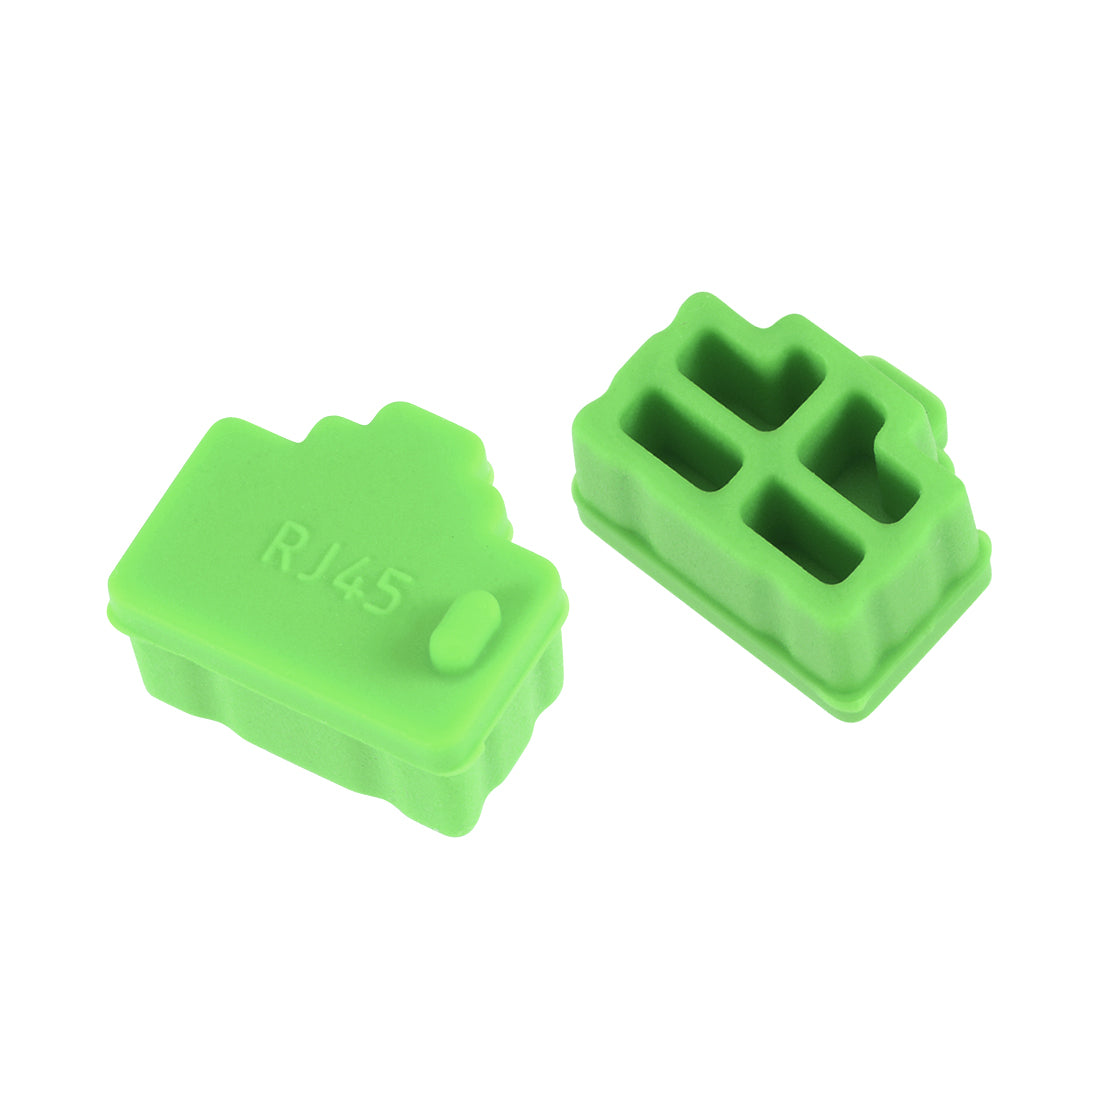 uxcell Uxcell 20pcs RJ45 Silicone Protectors Ethernet Hub Port Anti Dust Cap Cover, Green